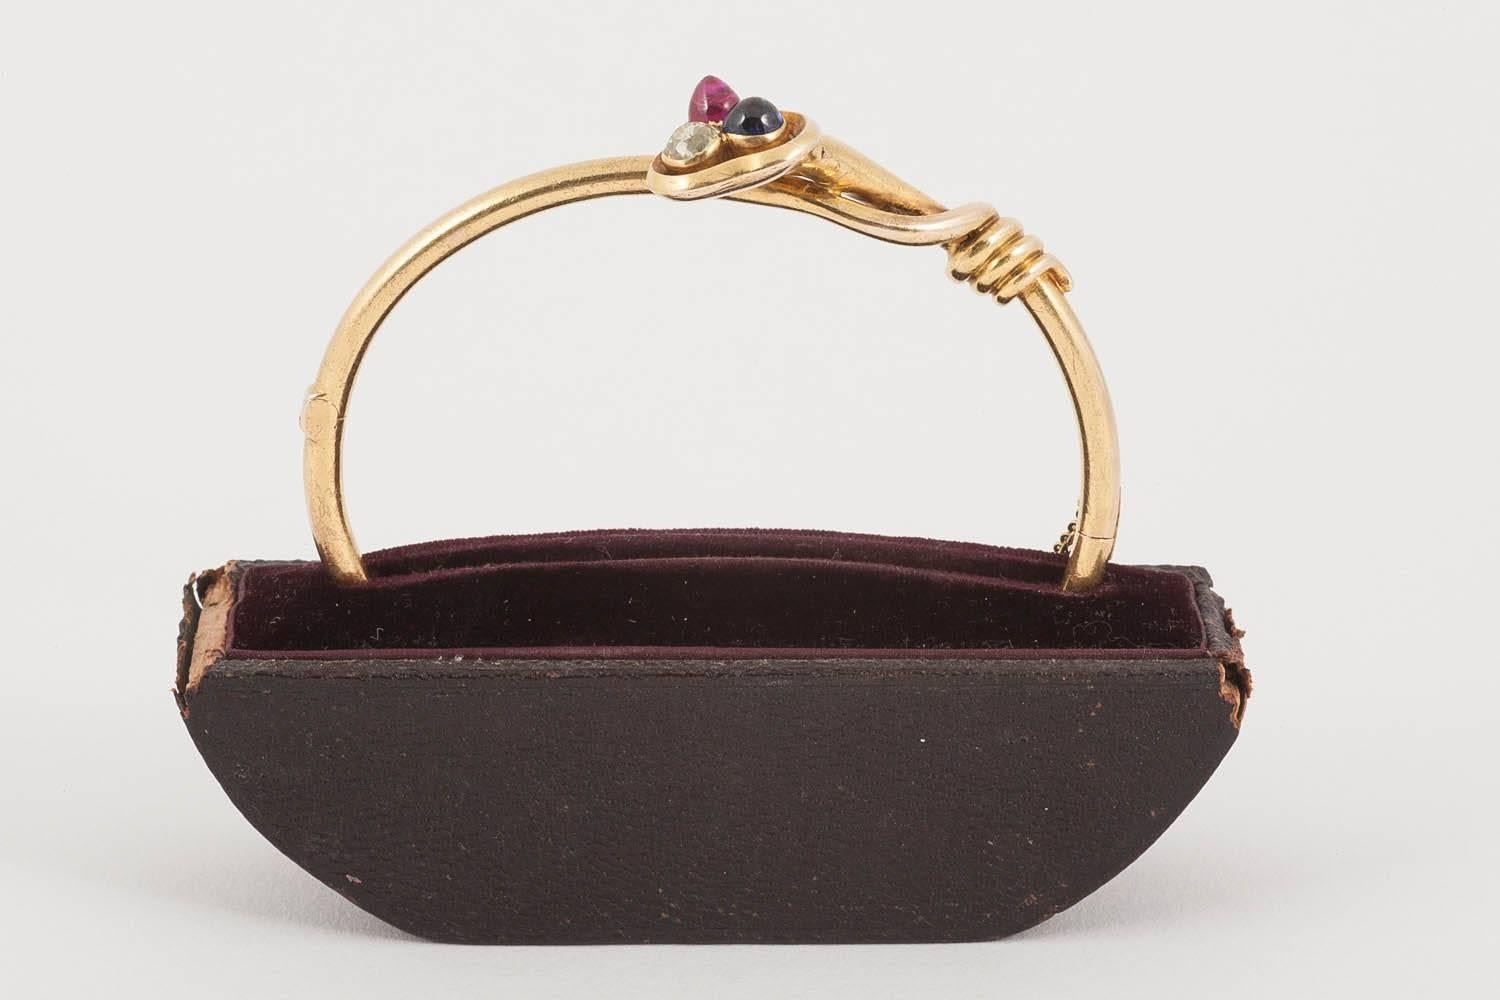 Late Victorian 18 carat gold tubular antique bangle of cross over design in the Russian style. Set with a central old cushion cut diamond, a fine coloured cabochon cut sapphire and a Burma ruby in excellent condition and of fine colour. Hinged